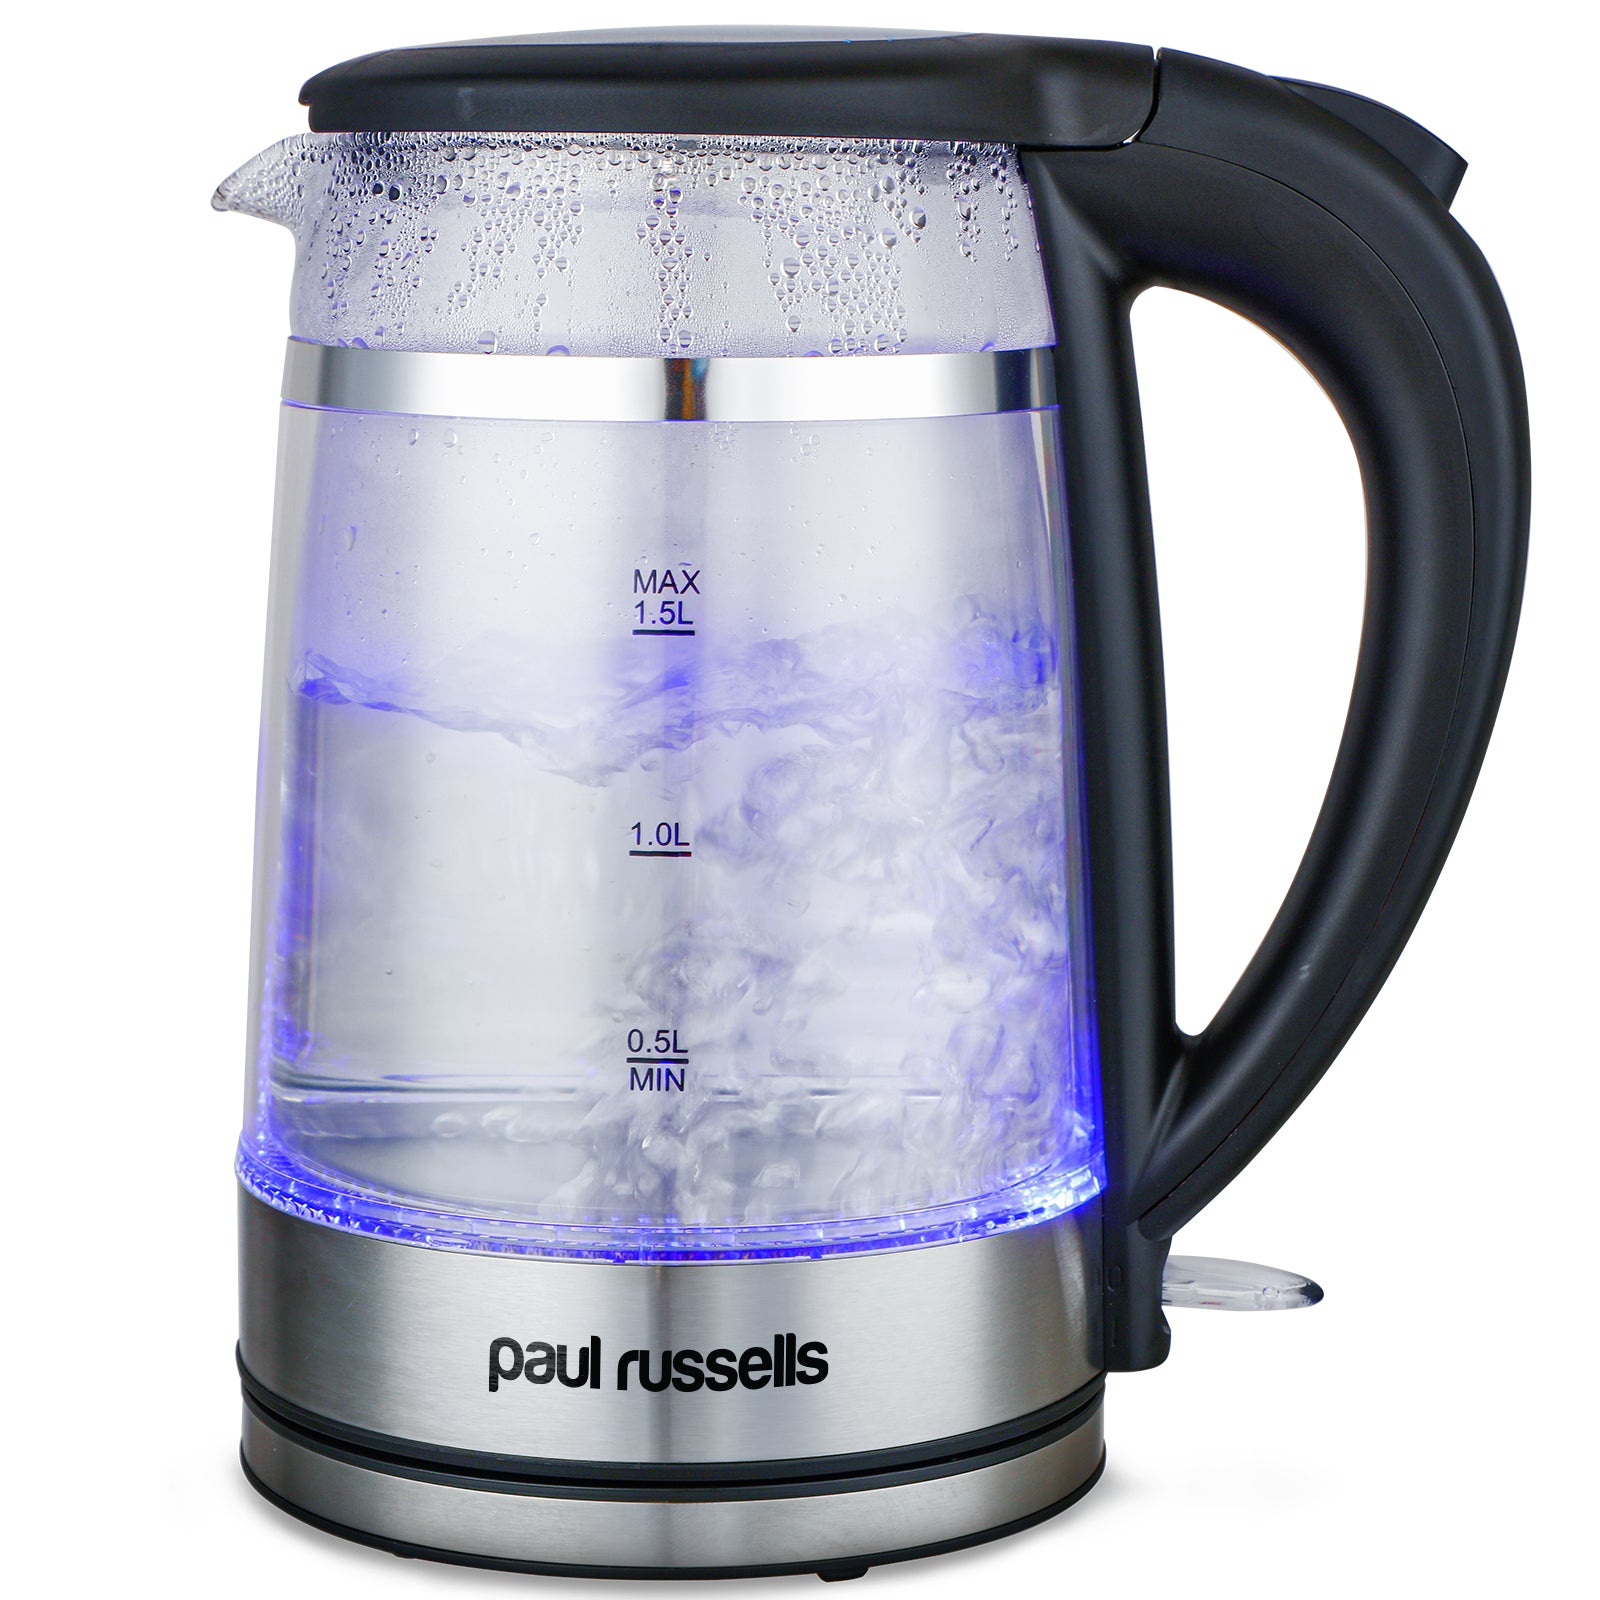 Paul Russells Electric Kettle, Quiet fast Boil, Double Layer Glass,3000W 1.5L with Blue LED, Boil-Dry Protection, Stainless Steel plate, Fast Boil Hot water dispenser, Instant Kettle, Black